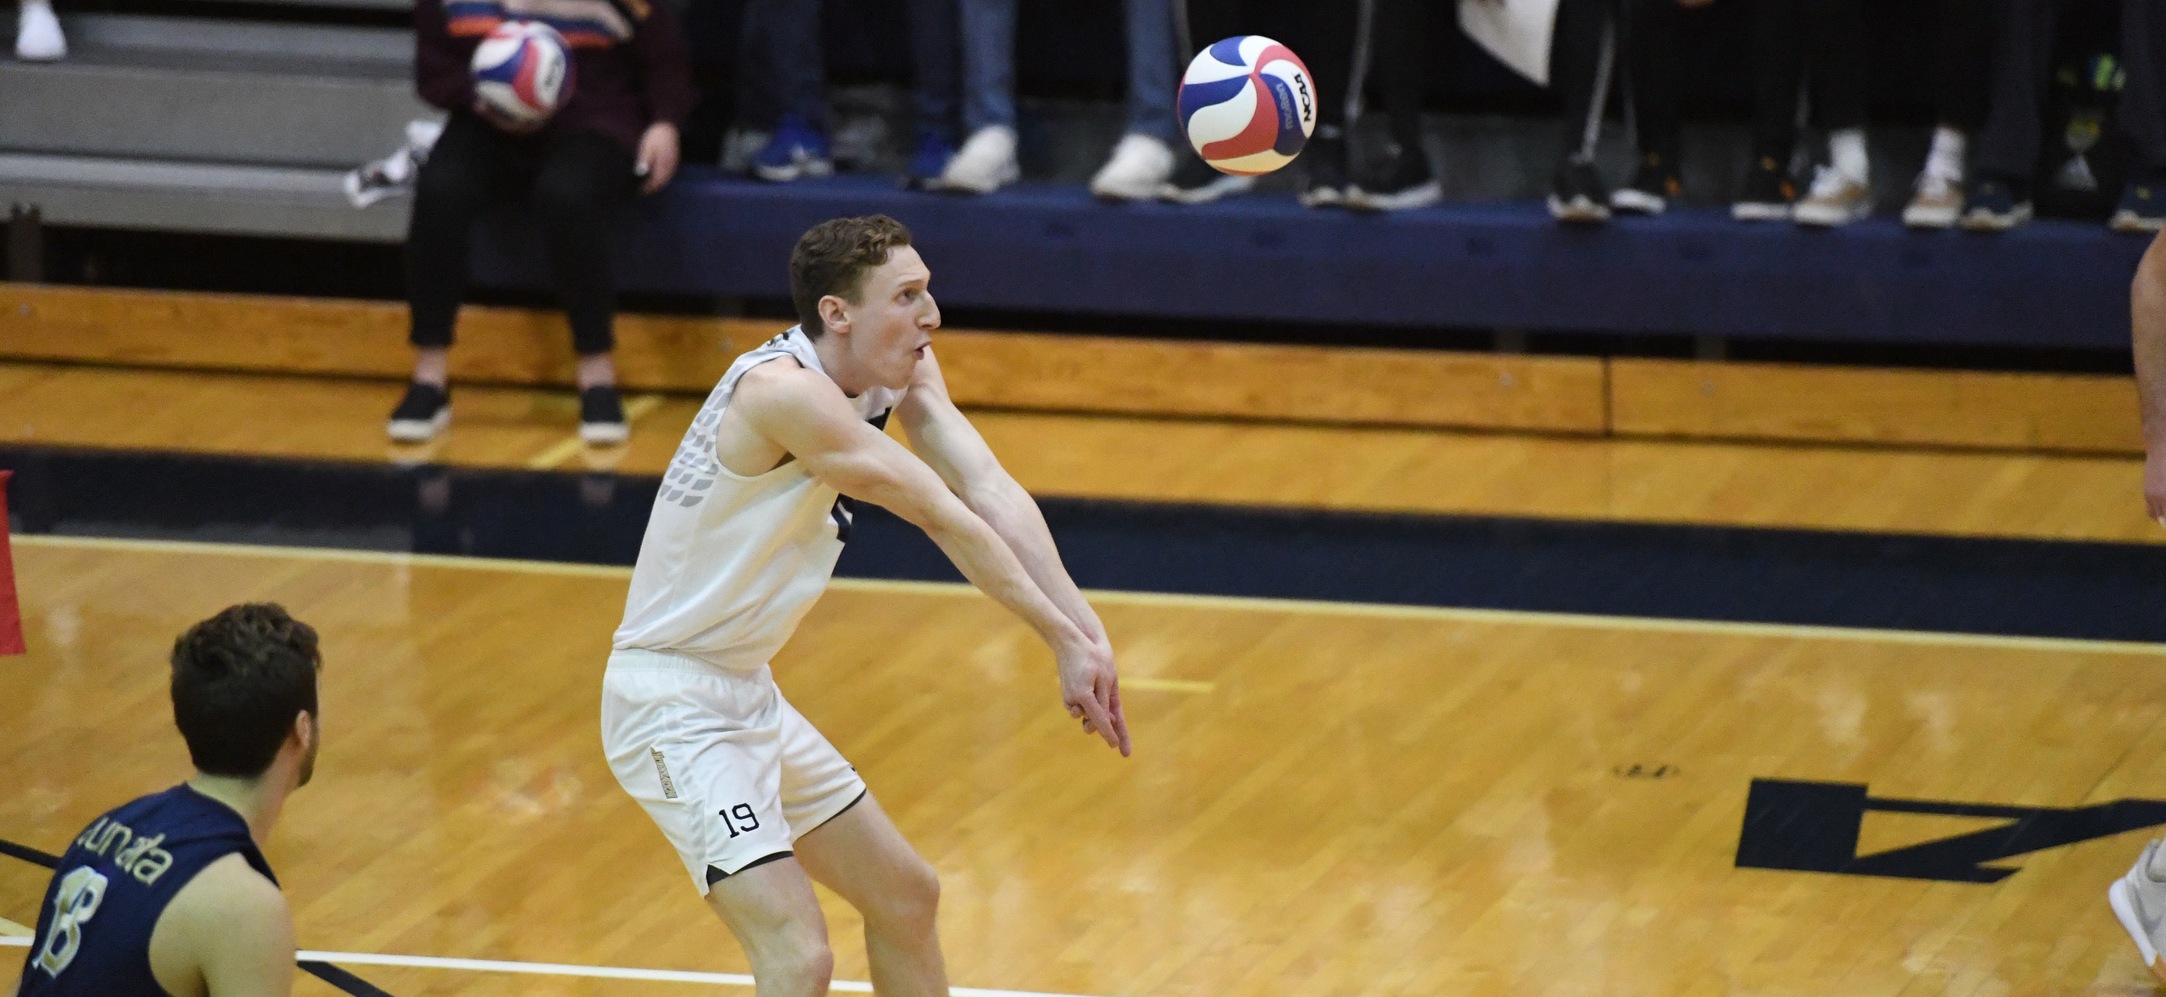 Men's Volleyball Sweeps Messiah at Farm Show Complex